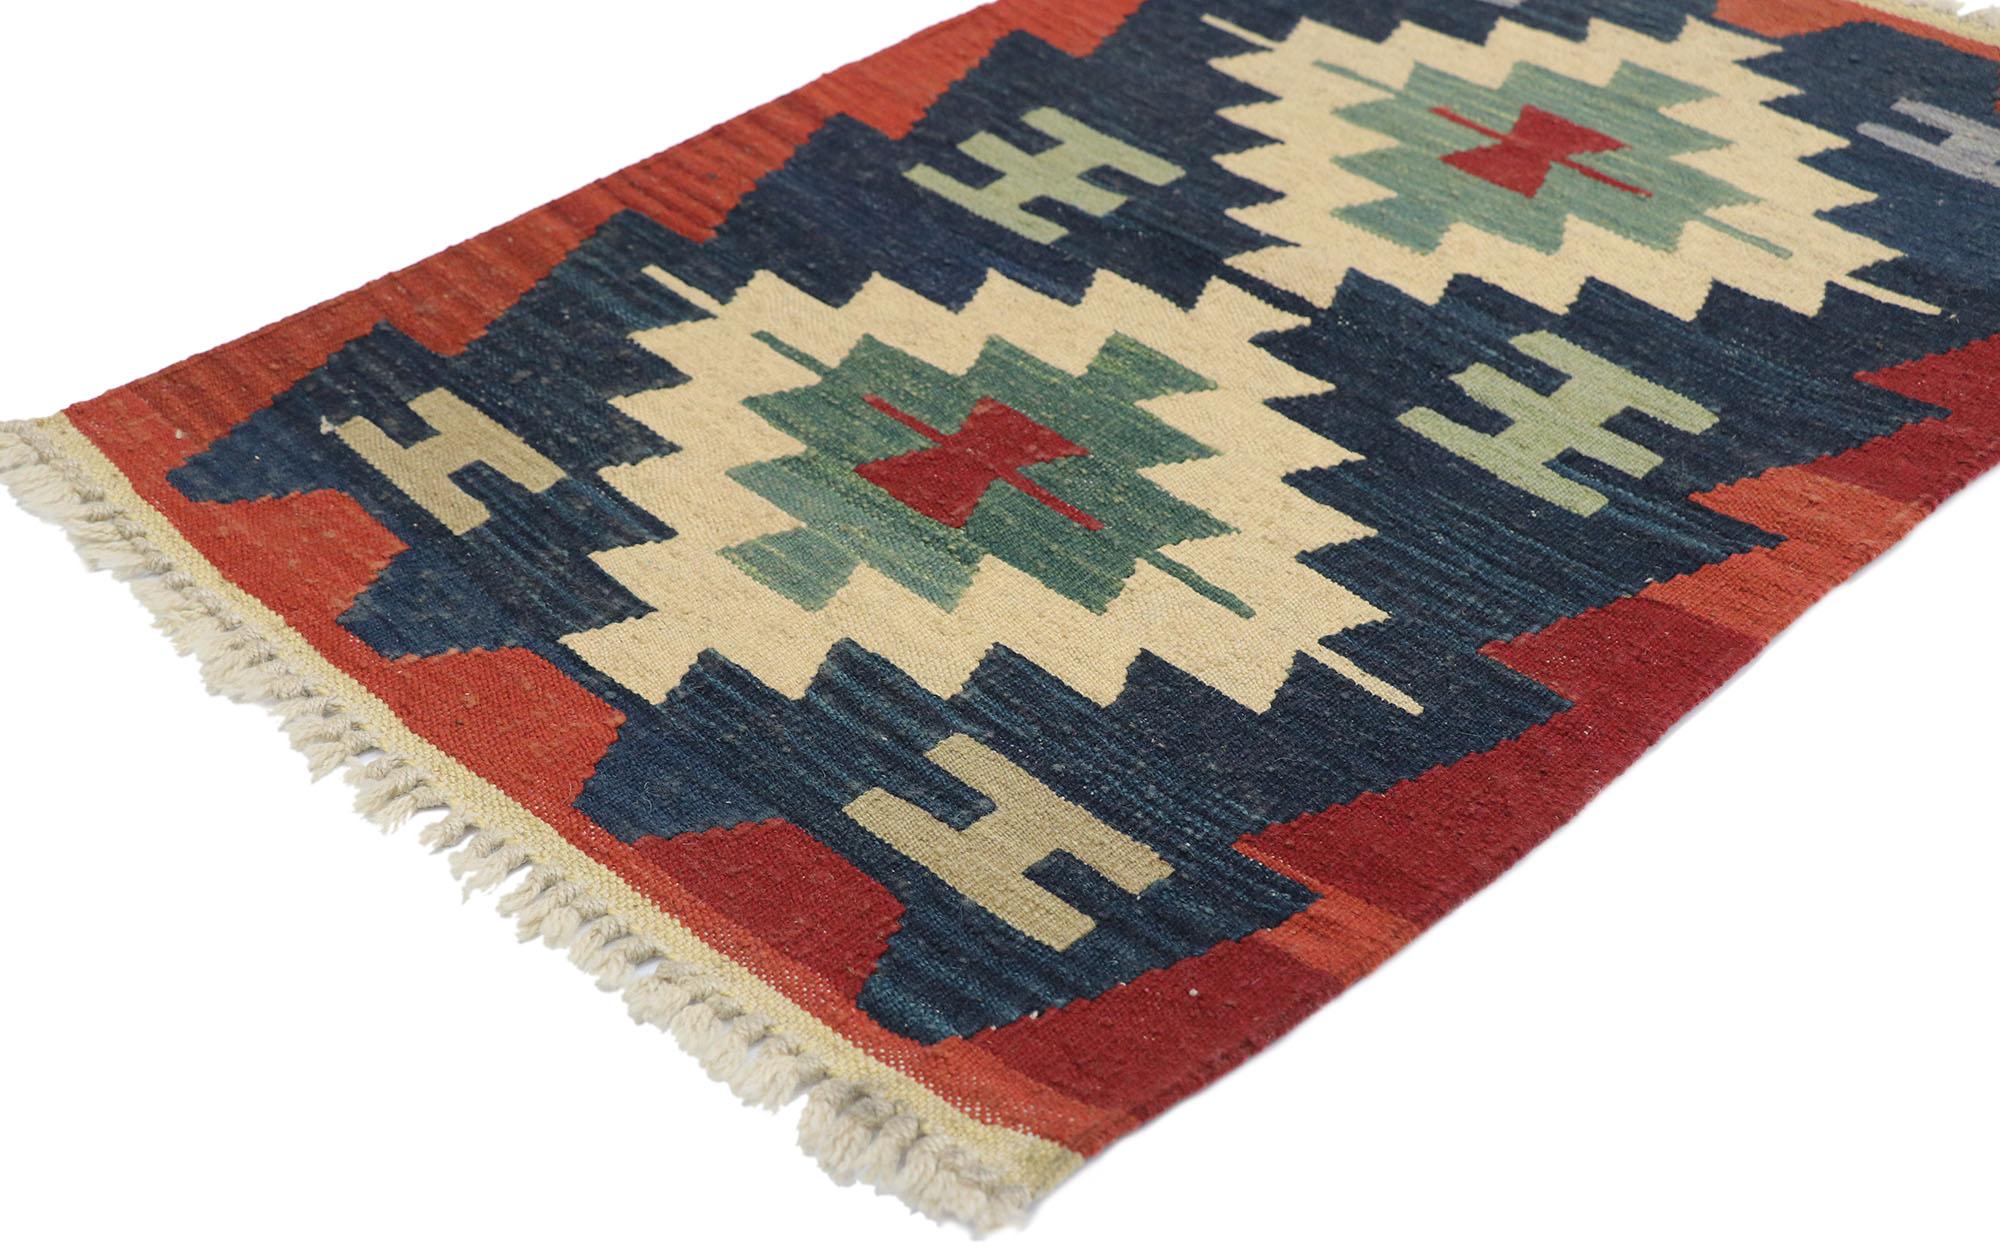 77911, vintage Persian Shiraz Kilim rug with Tribal style. Full of tiny details and a bold expressive design combined with vibrant colors and tribal style, this hand-woven wool vintage Persian Shiraz kilim rug is a captivating vision of woven